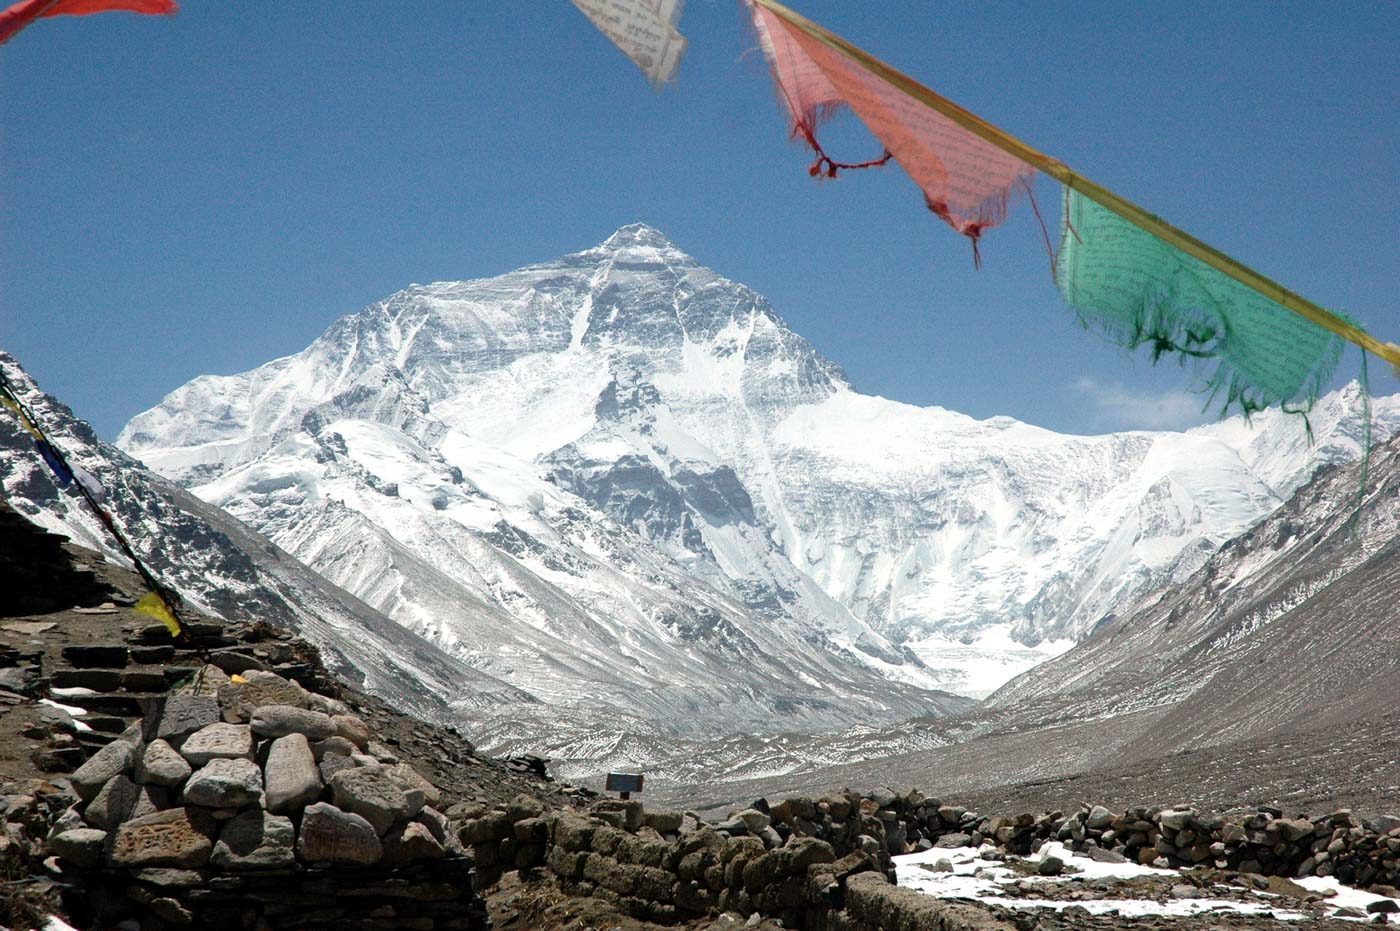 MT. EVEREST. The Prayer Flags at Mt Everest Tibet Side, shot by Carina Dayodon 